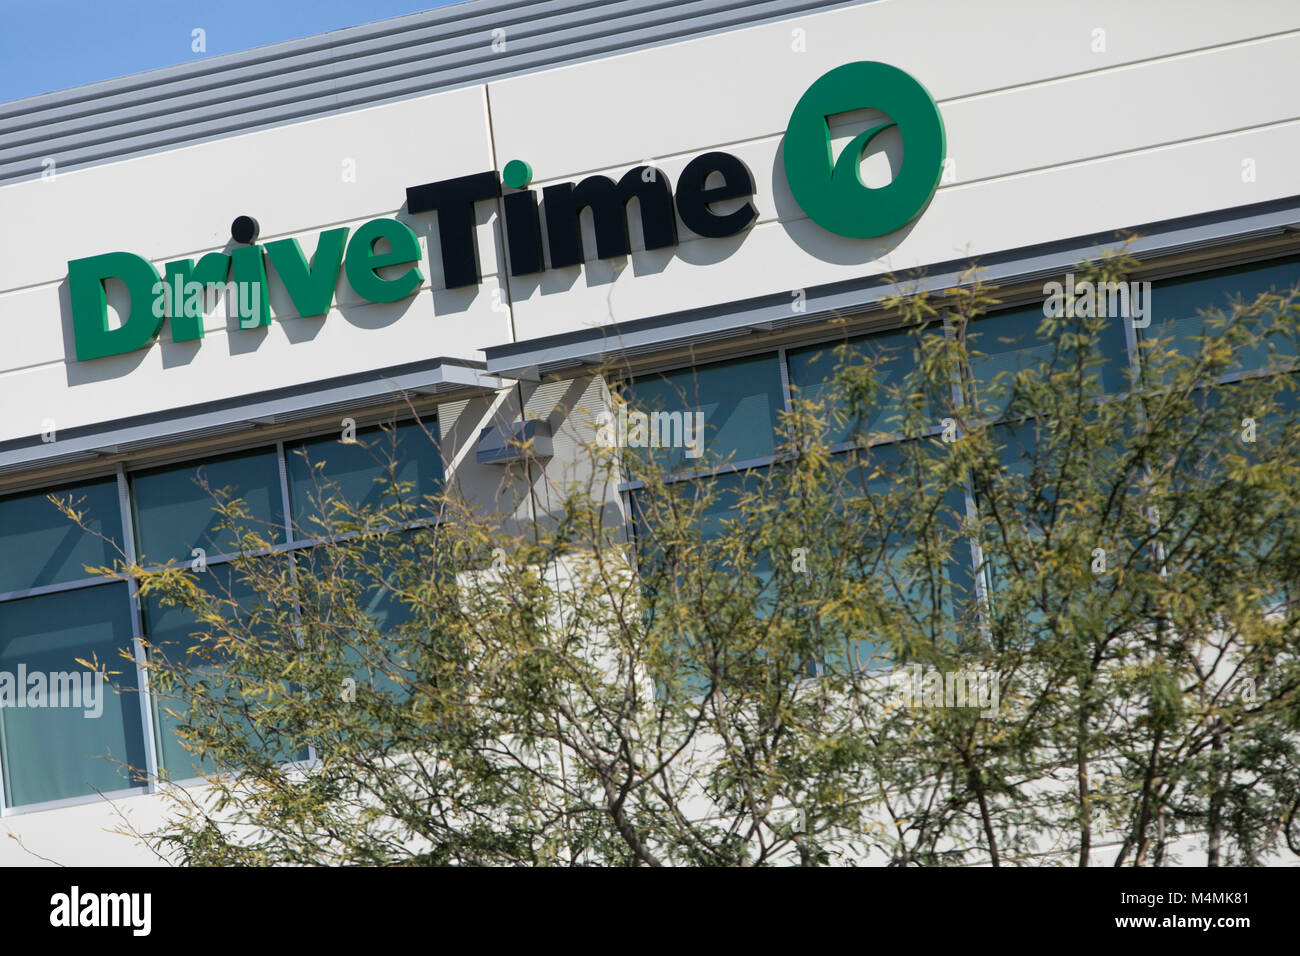 A logo sign outside of the headquarters of the DriveTime Automotive Group Inc., in Tempe, Arizona, on February 3, 2018. Stock Photo